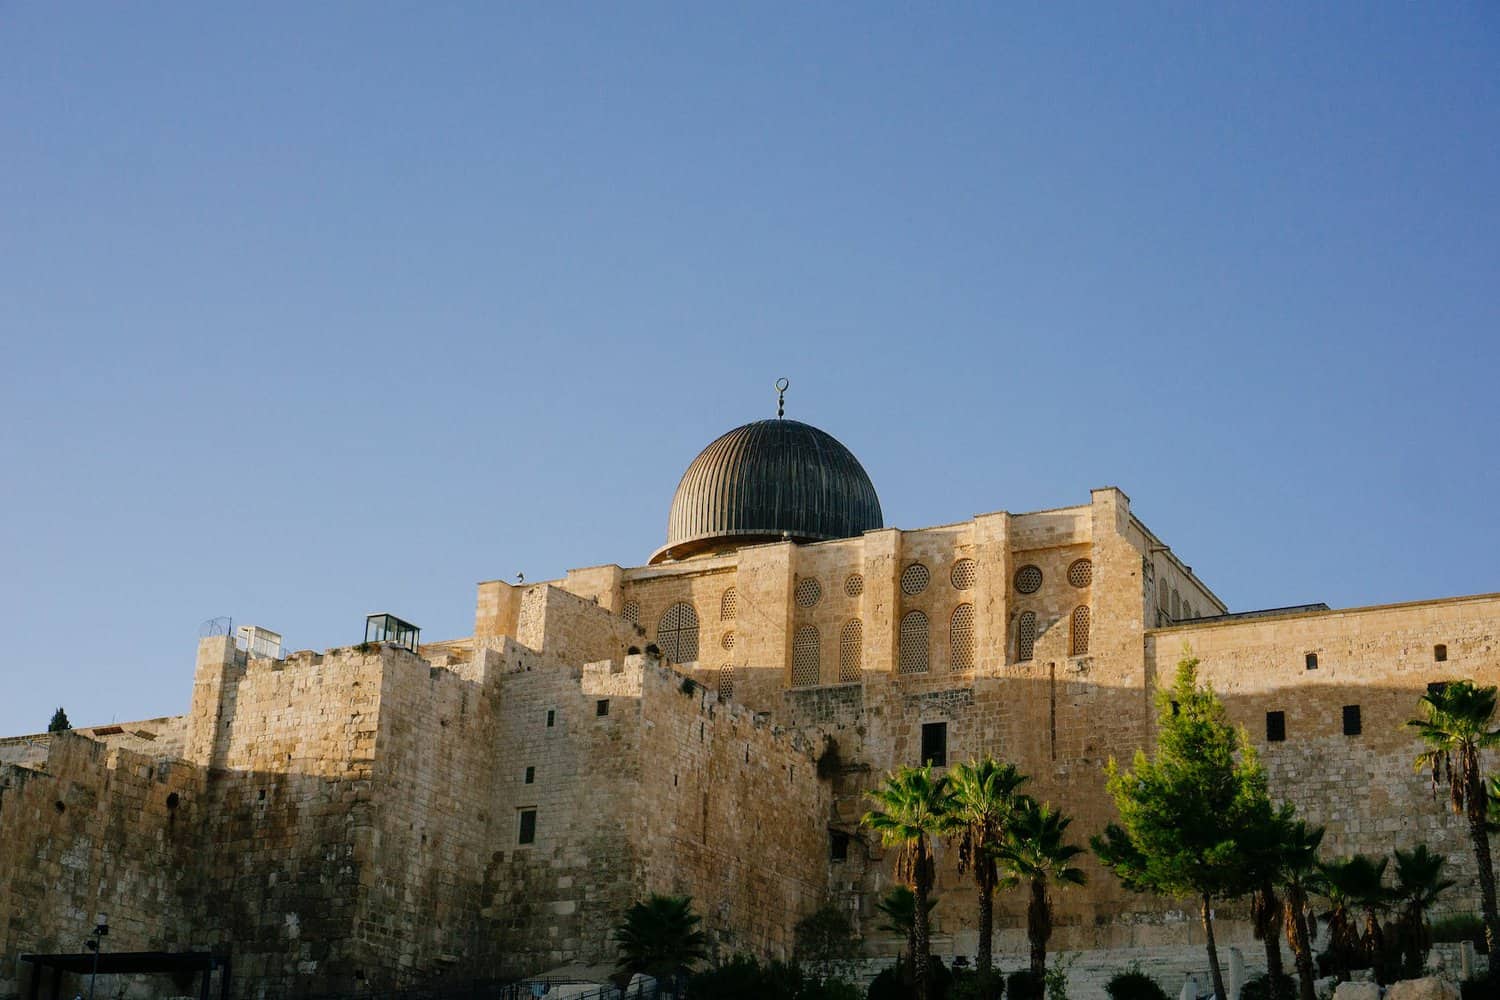 bibilcal site of jerusalem, beige coloured walled mosque with blue dome